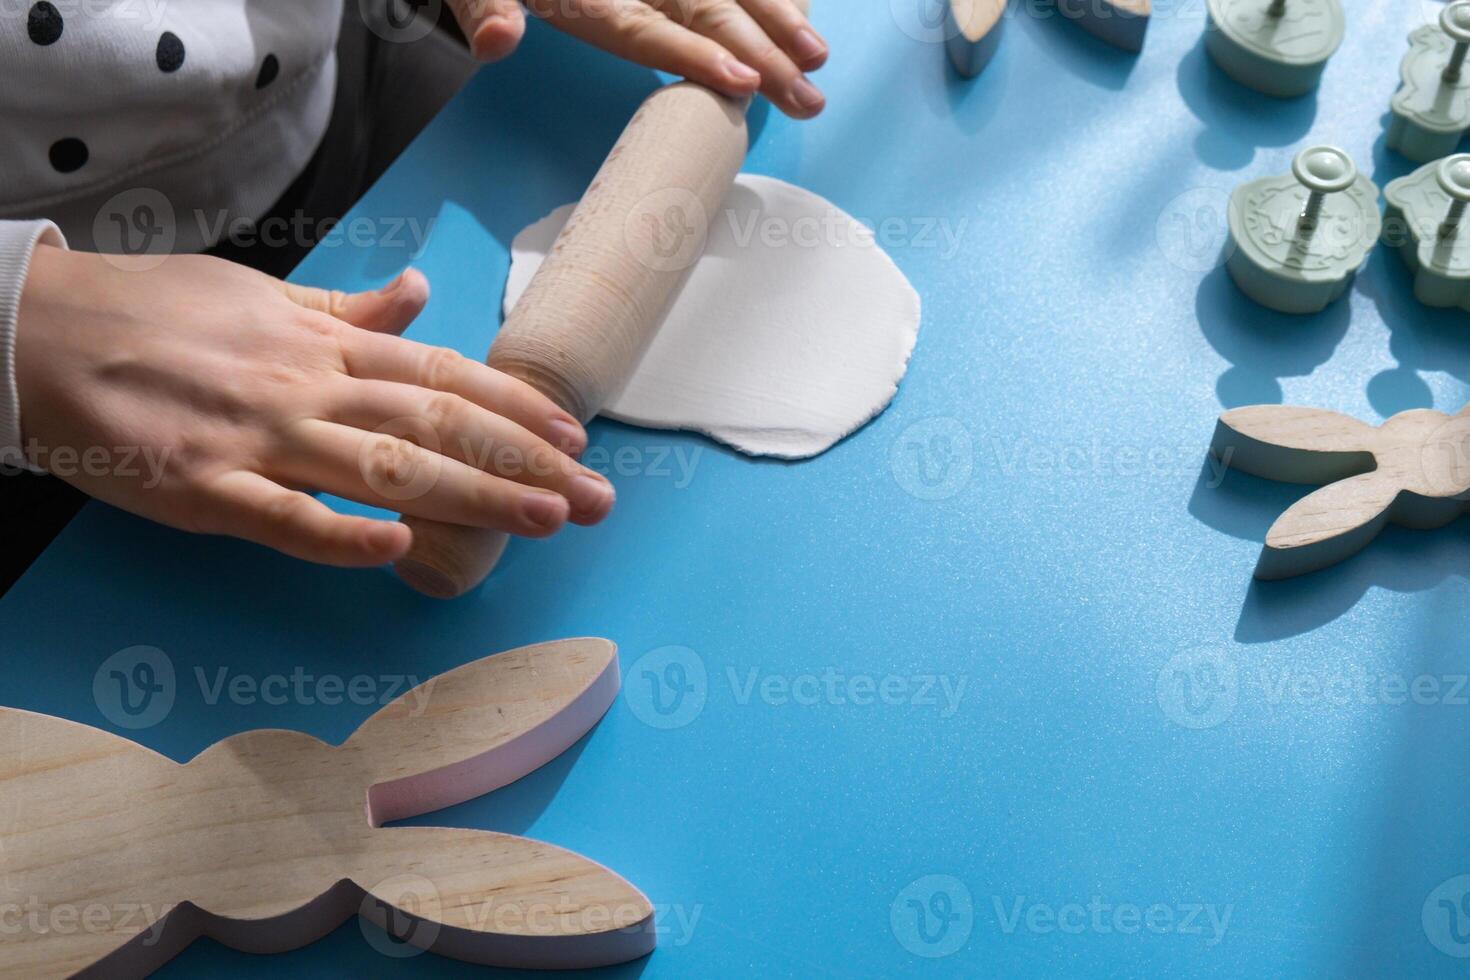 Creator is using white air dry clay for making decor to EASTER holiday. Creating hobby recreation activity that involves fingers. DIY crafting Modern art photo